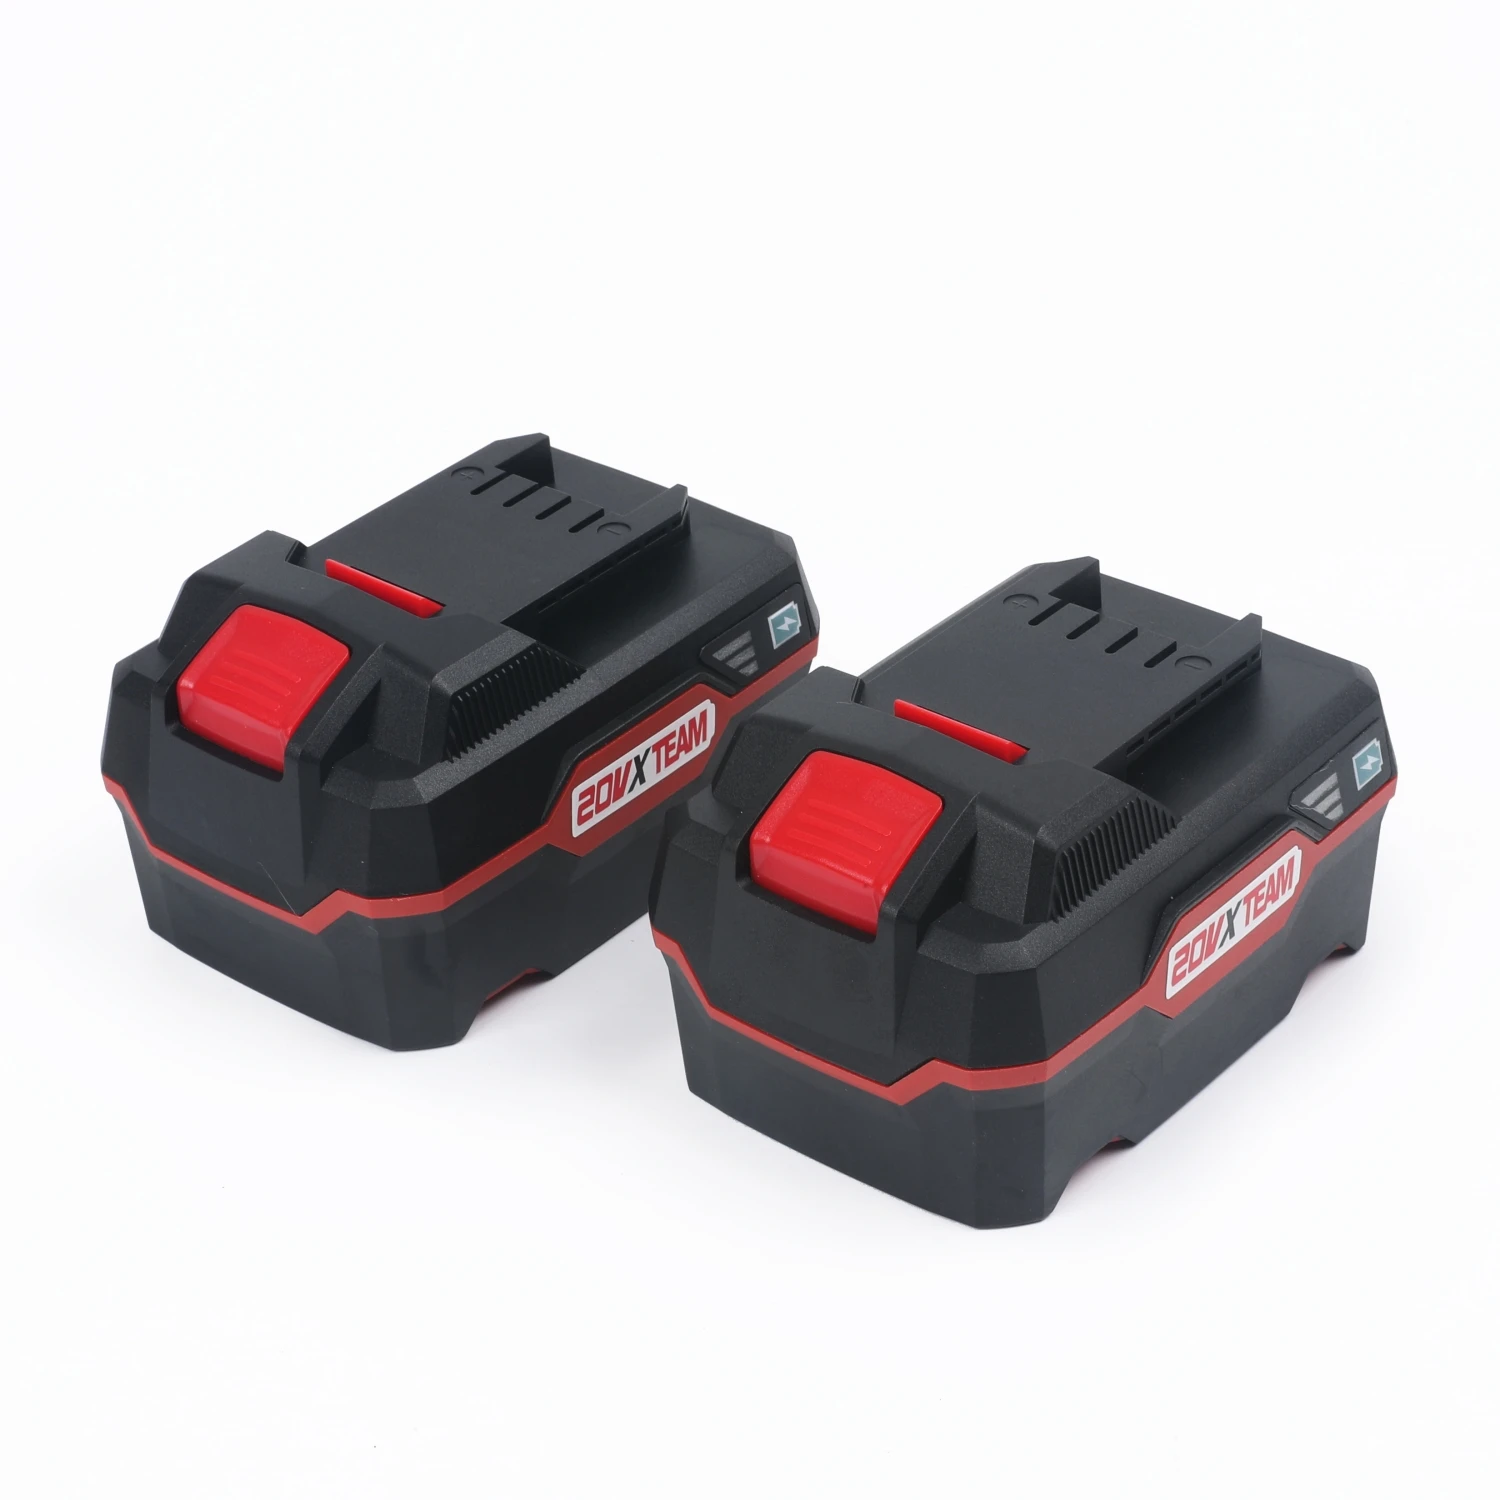 

Update 2Packs 20V 5 Ah Lithium-Ion Akkupack for Parkside 20V Team Cordless Power Tools for for PAP20 A3, PAP 20 B3, PAPS 208 A1